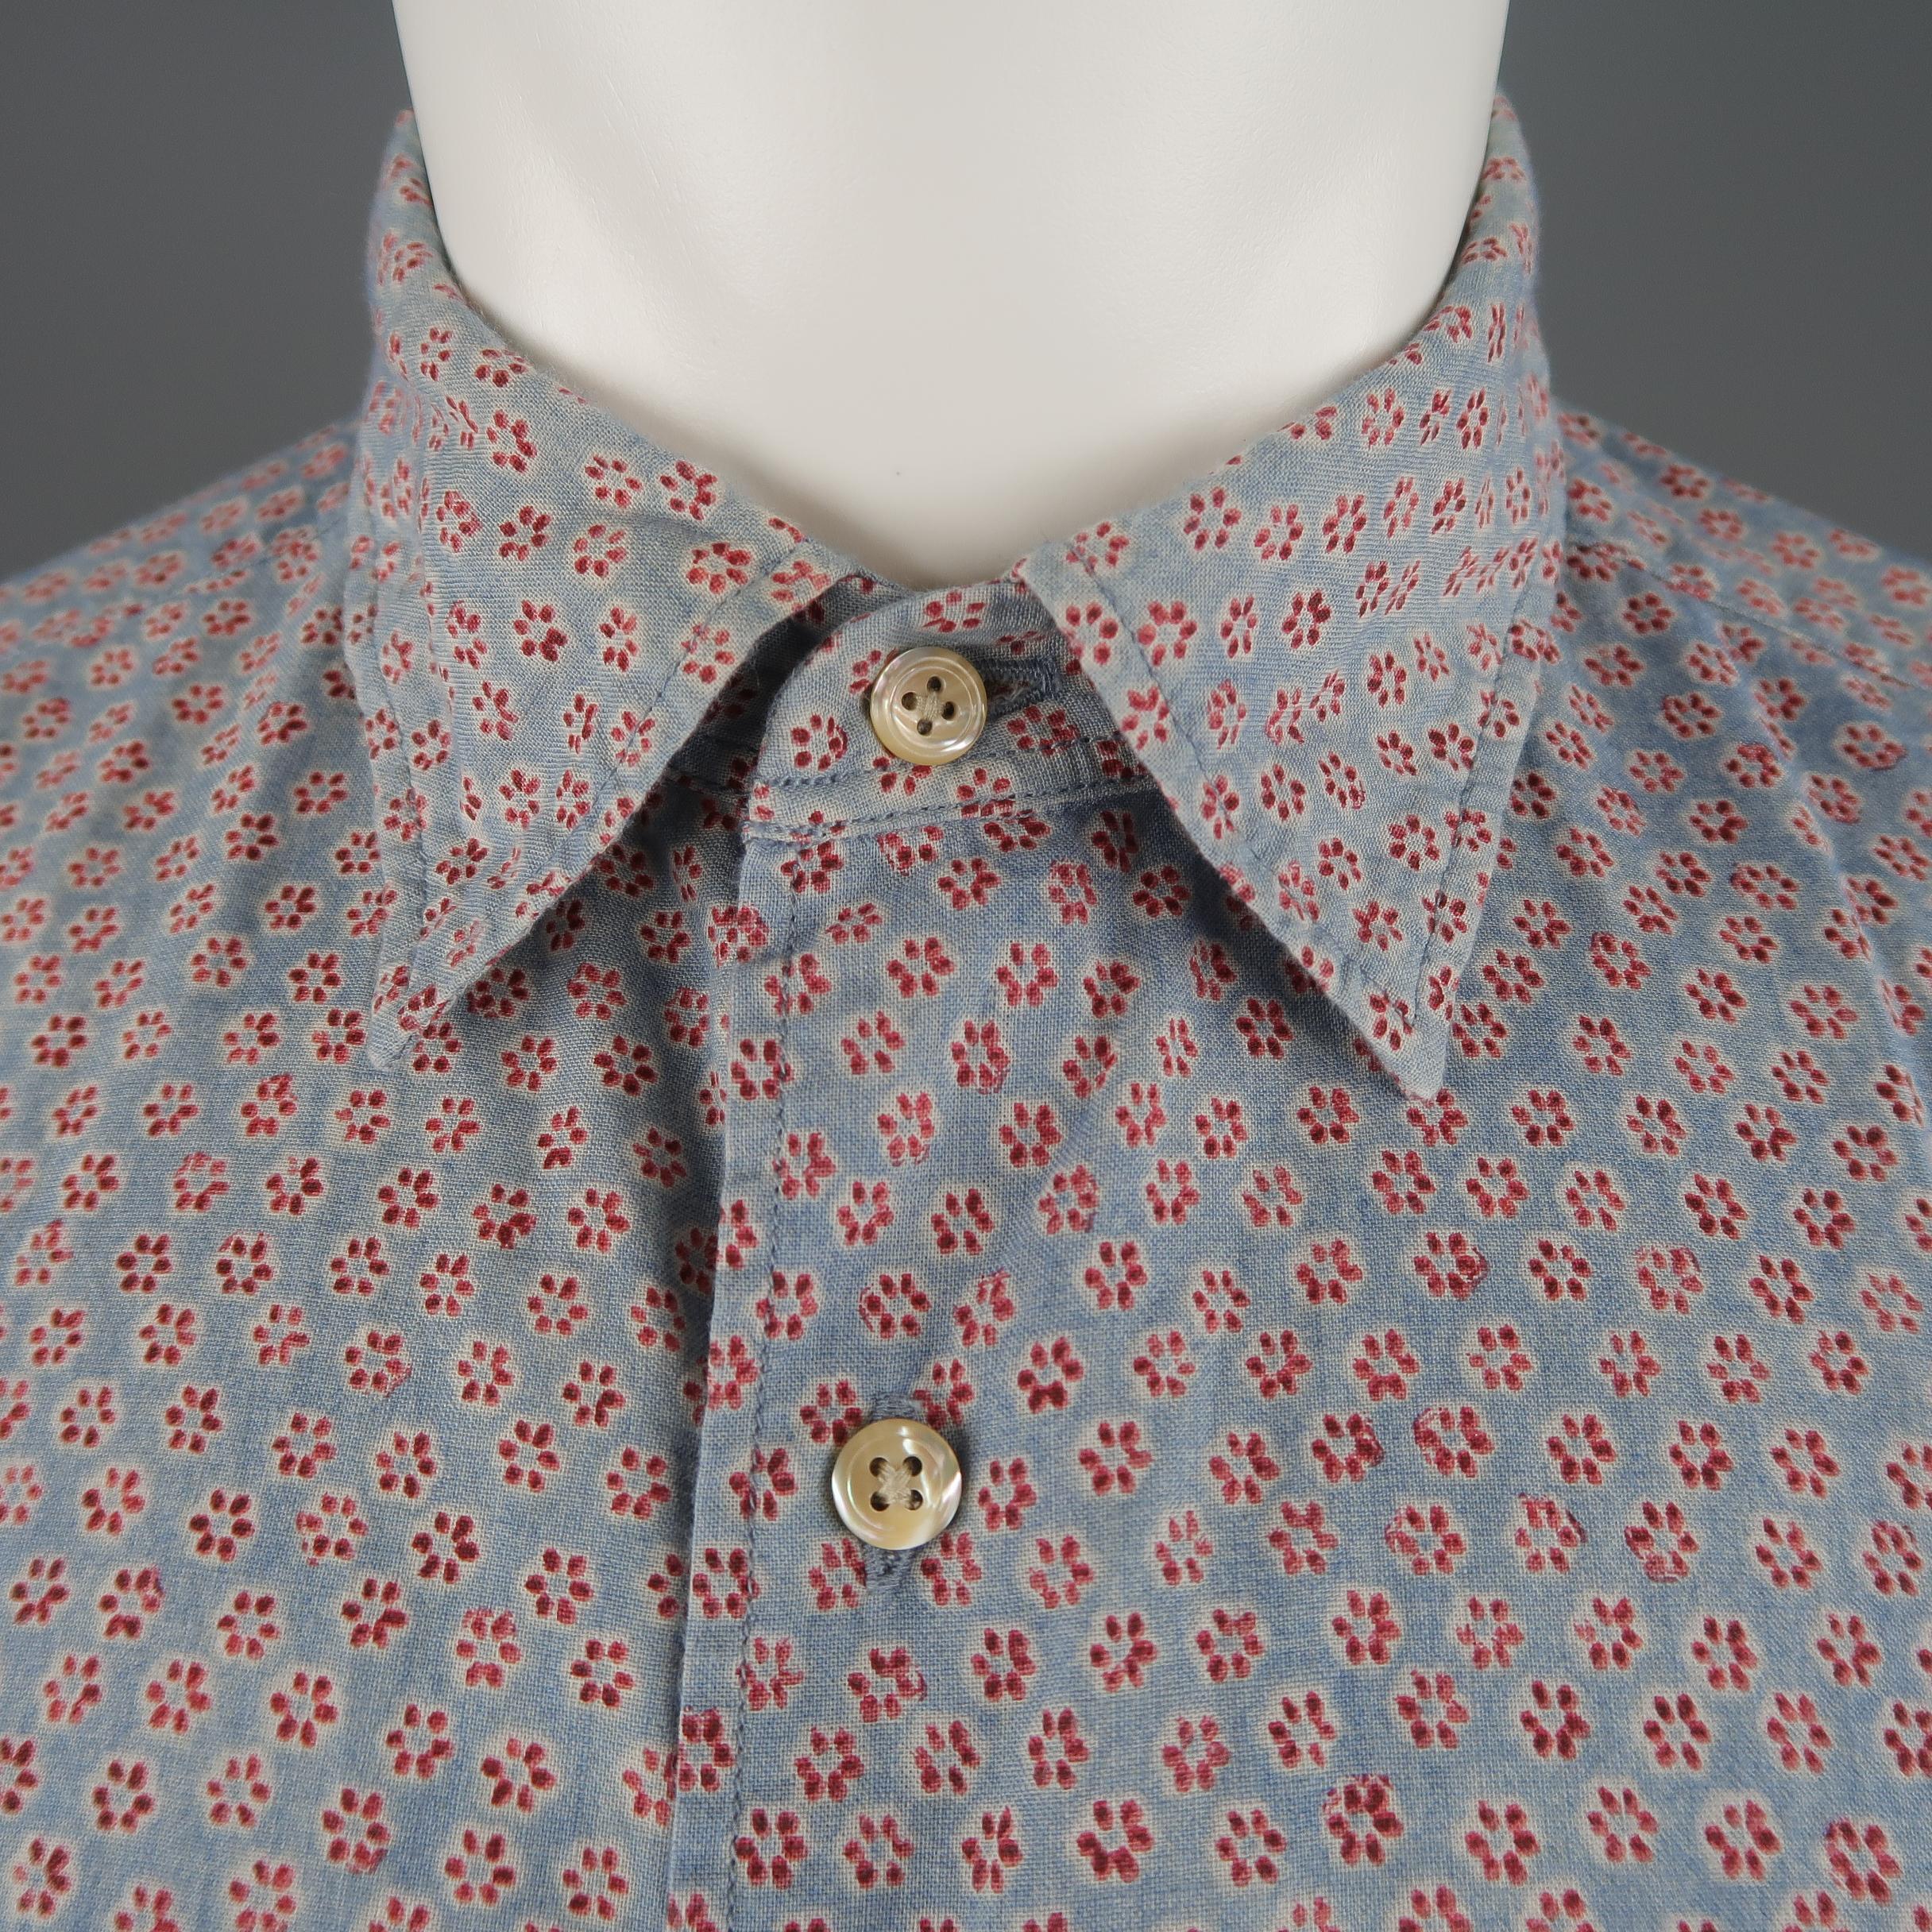 45RPM shirt comes in blue and red floral print cotton with a pointed collar, patch flap breast pocket, and embroidered R logo.  Made in Japan.
 
Excellent Pre-Owned Condition.
Marked: 4
 
Measurements:
 
Shoulder: 17 in.
Chest: 46 in.
Sleeve: 25